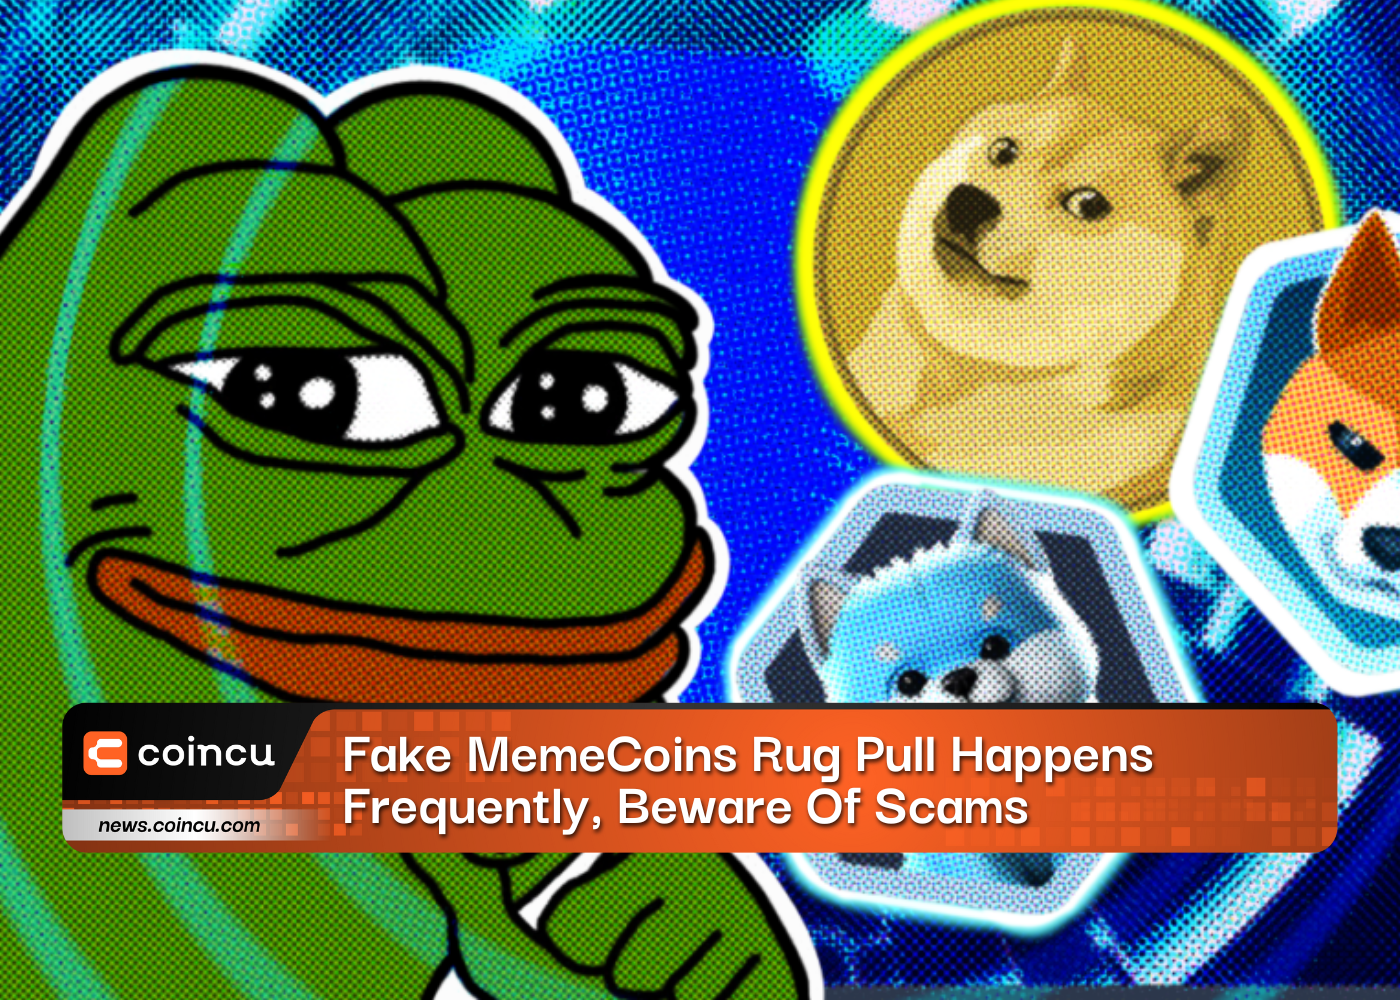 Fake MemeCoins Rug Pull Happens Frequently, Beware Of Scams